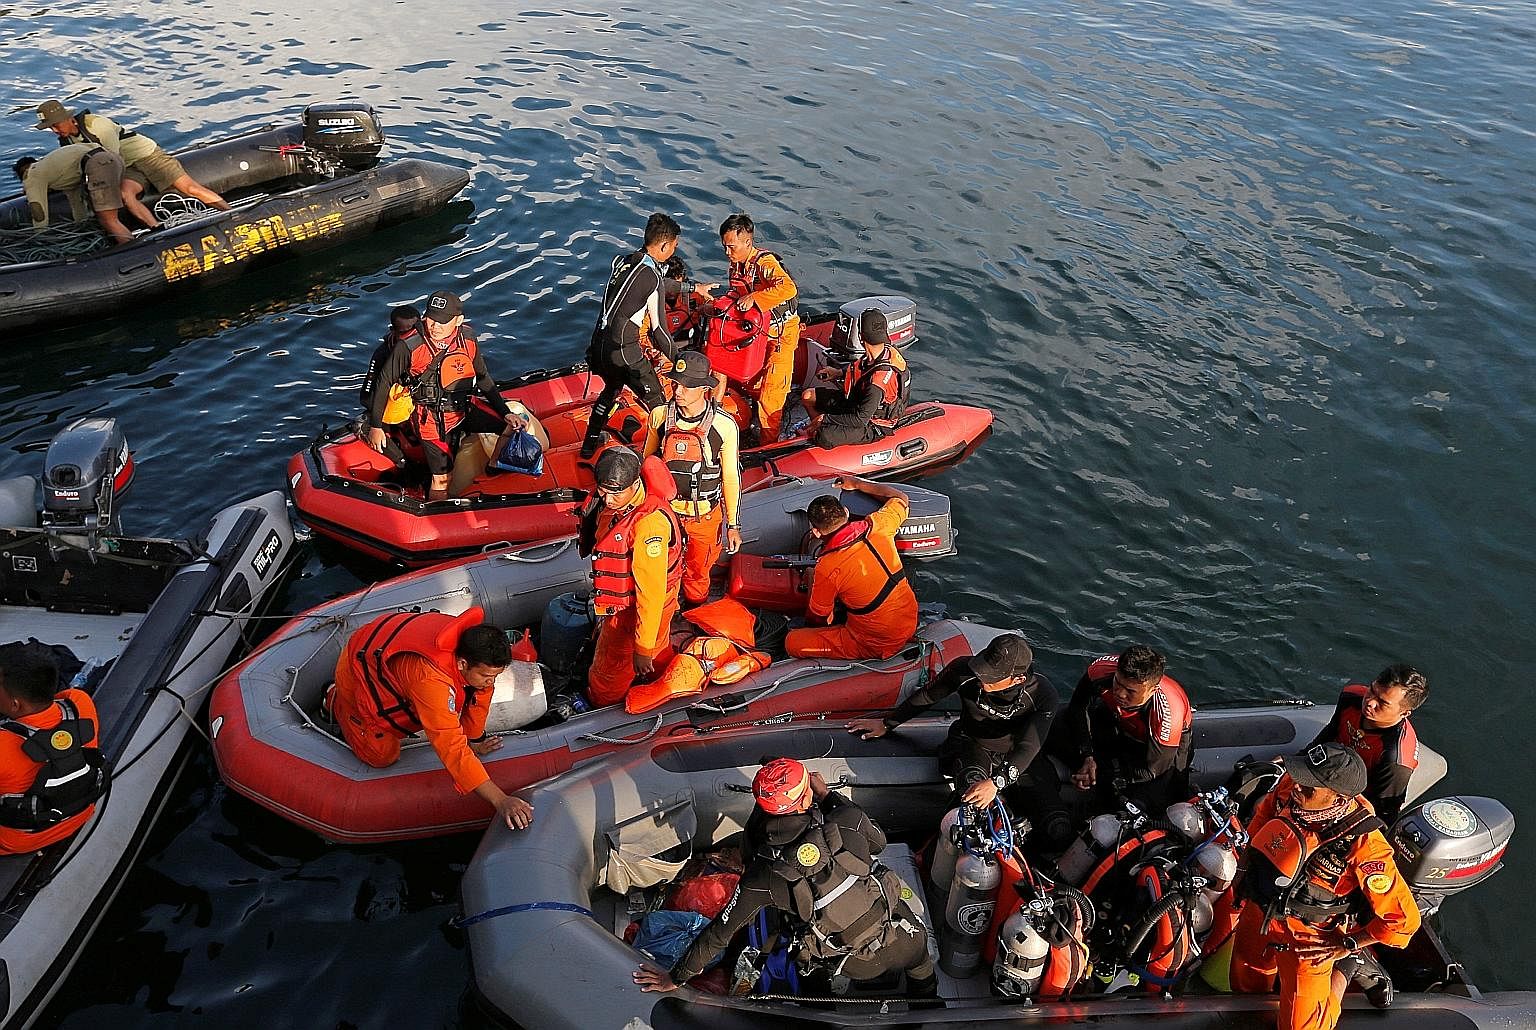 Rescuers looking for missing people after Monday's ferry accident on Lake Toba in Indonesia.